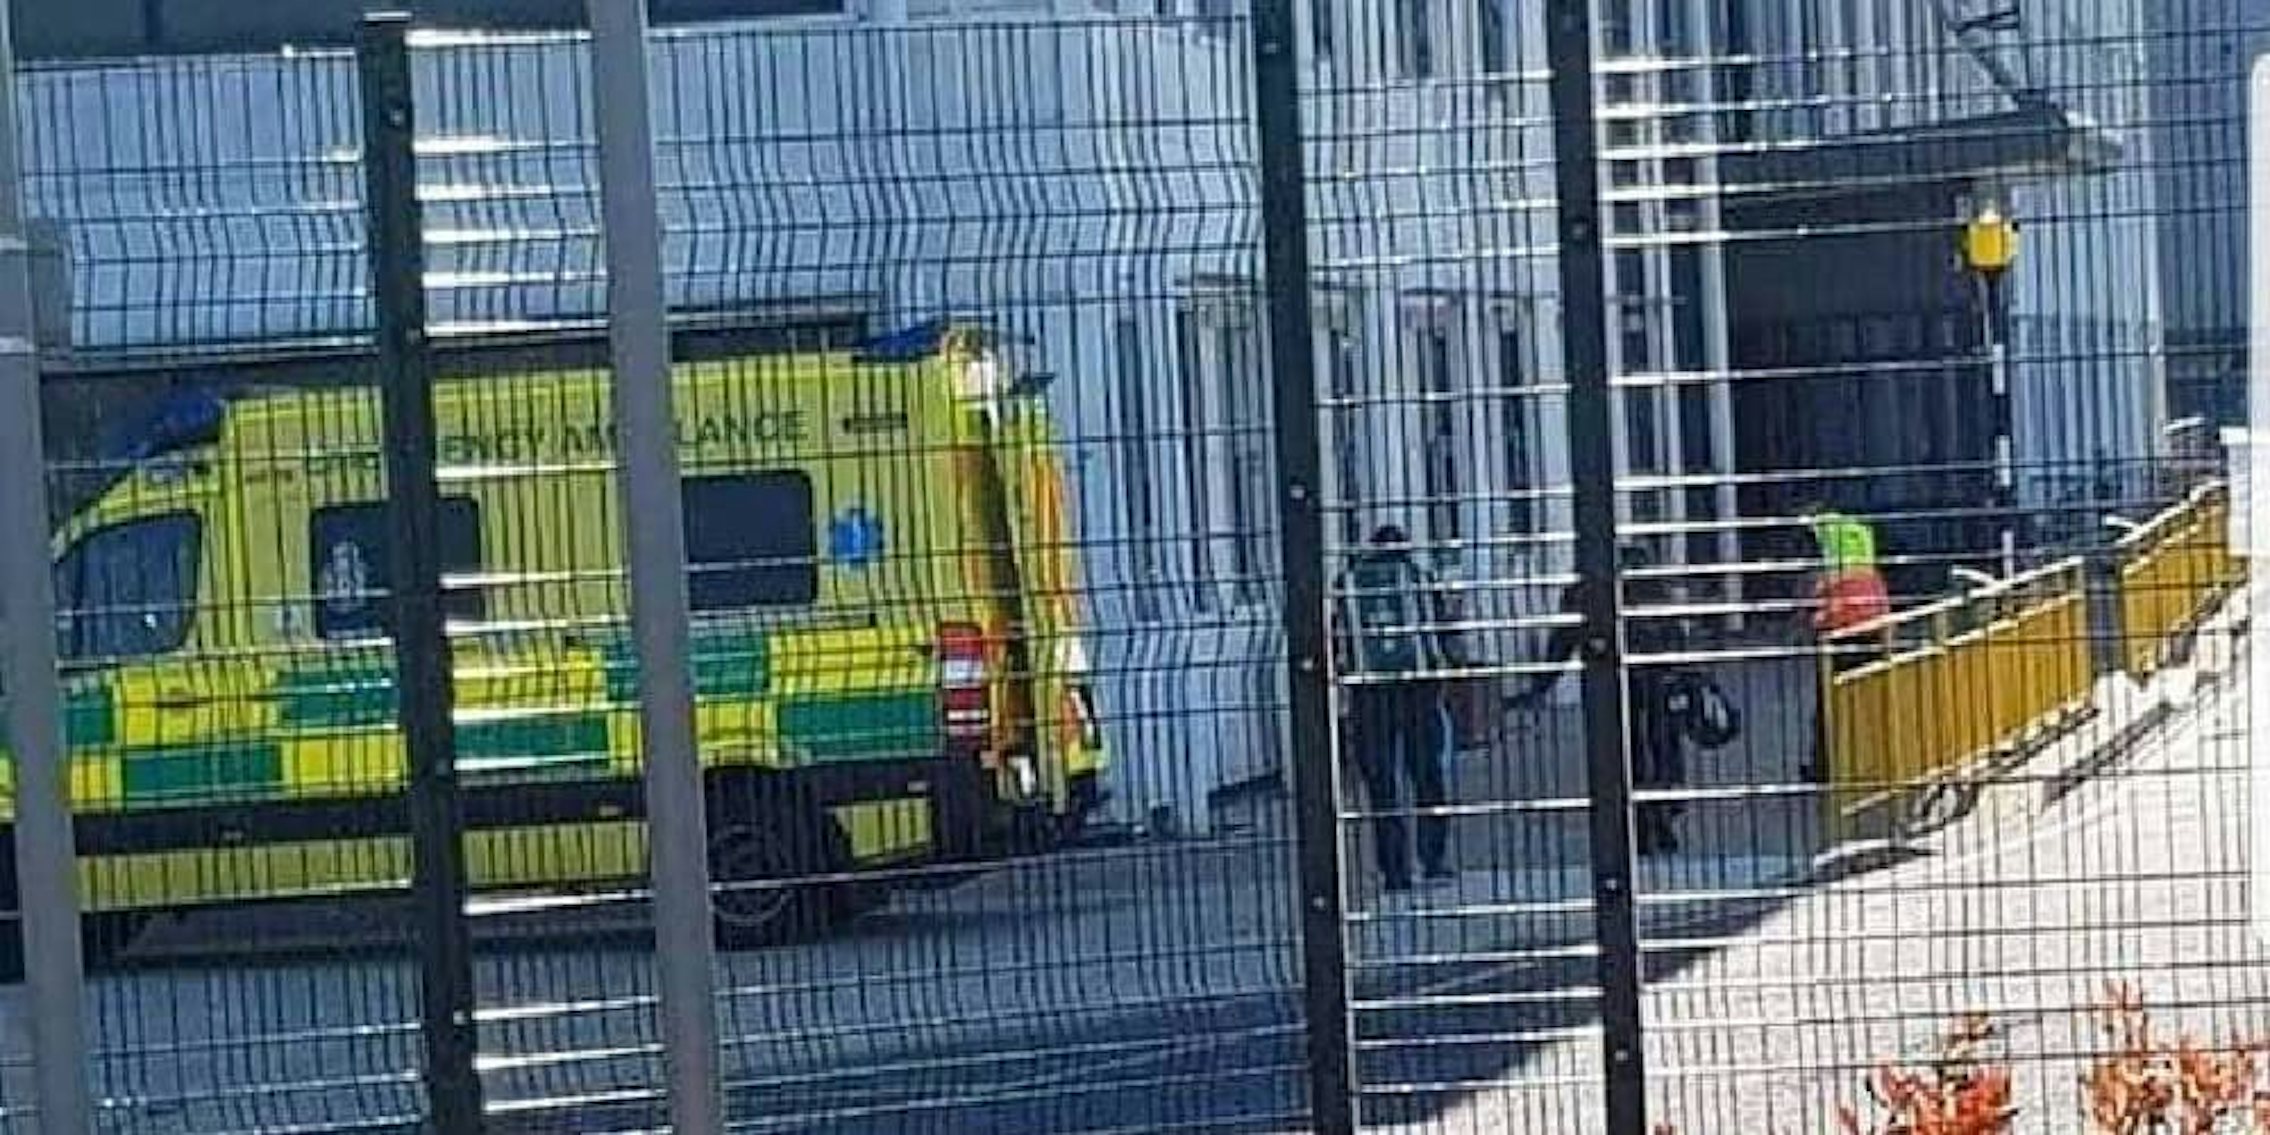 A workers union group said the ASOS facility called three ambulances on Friday